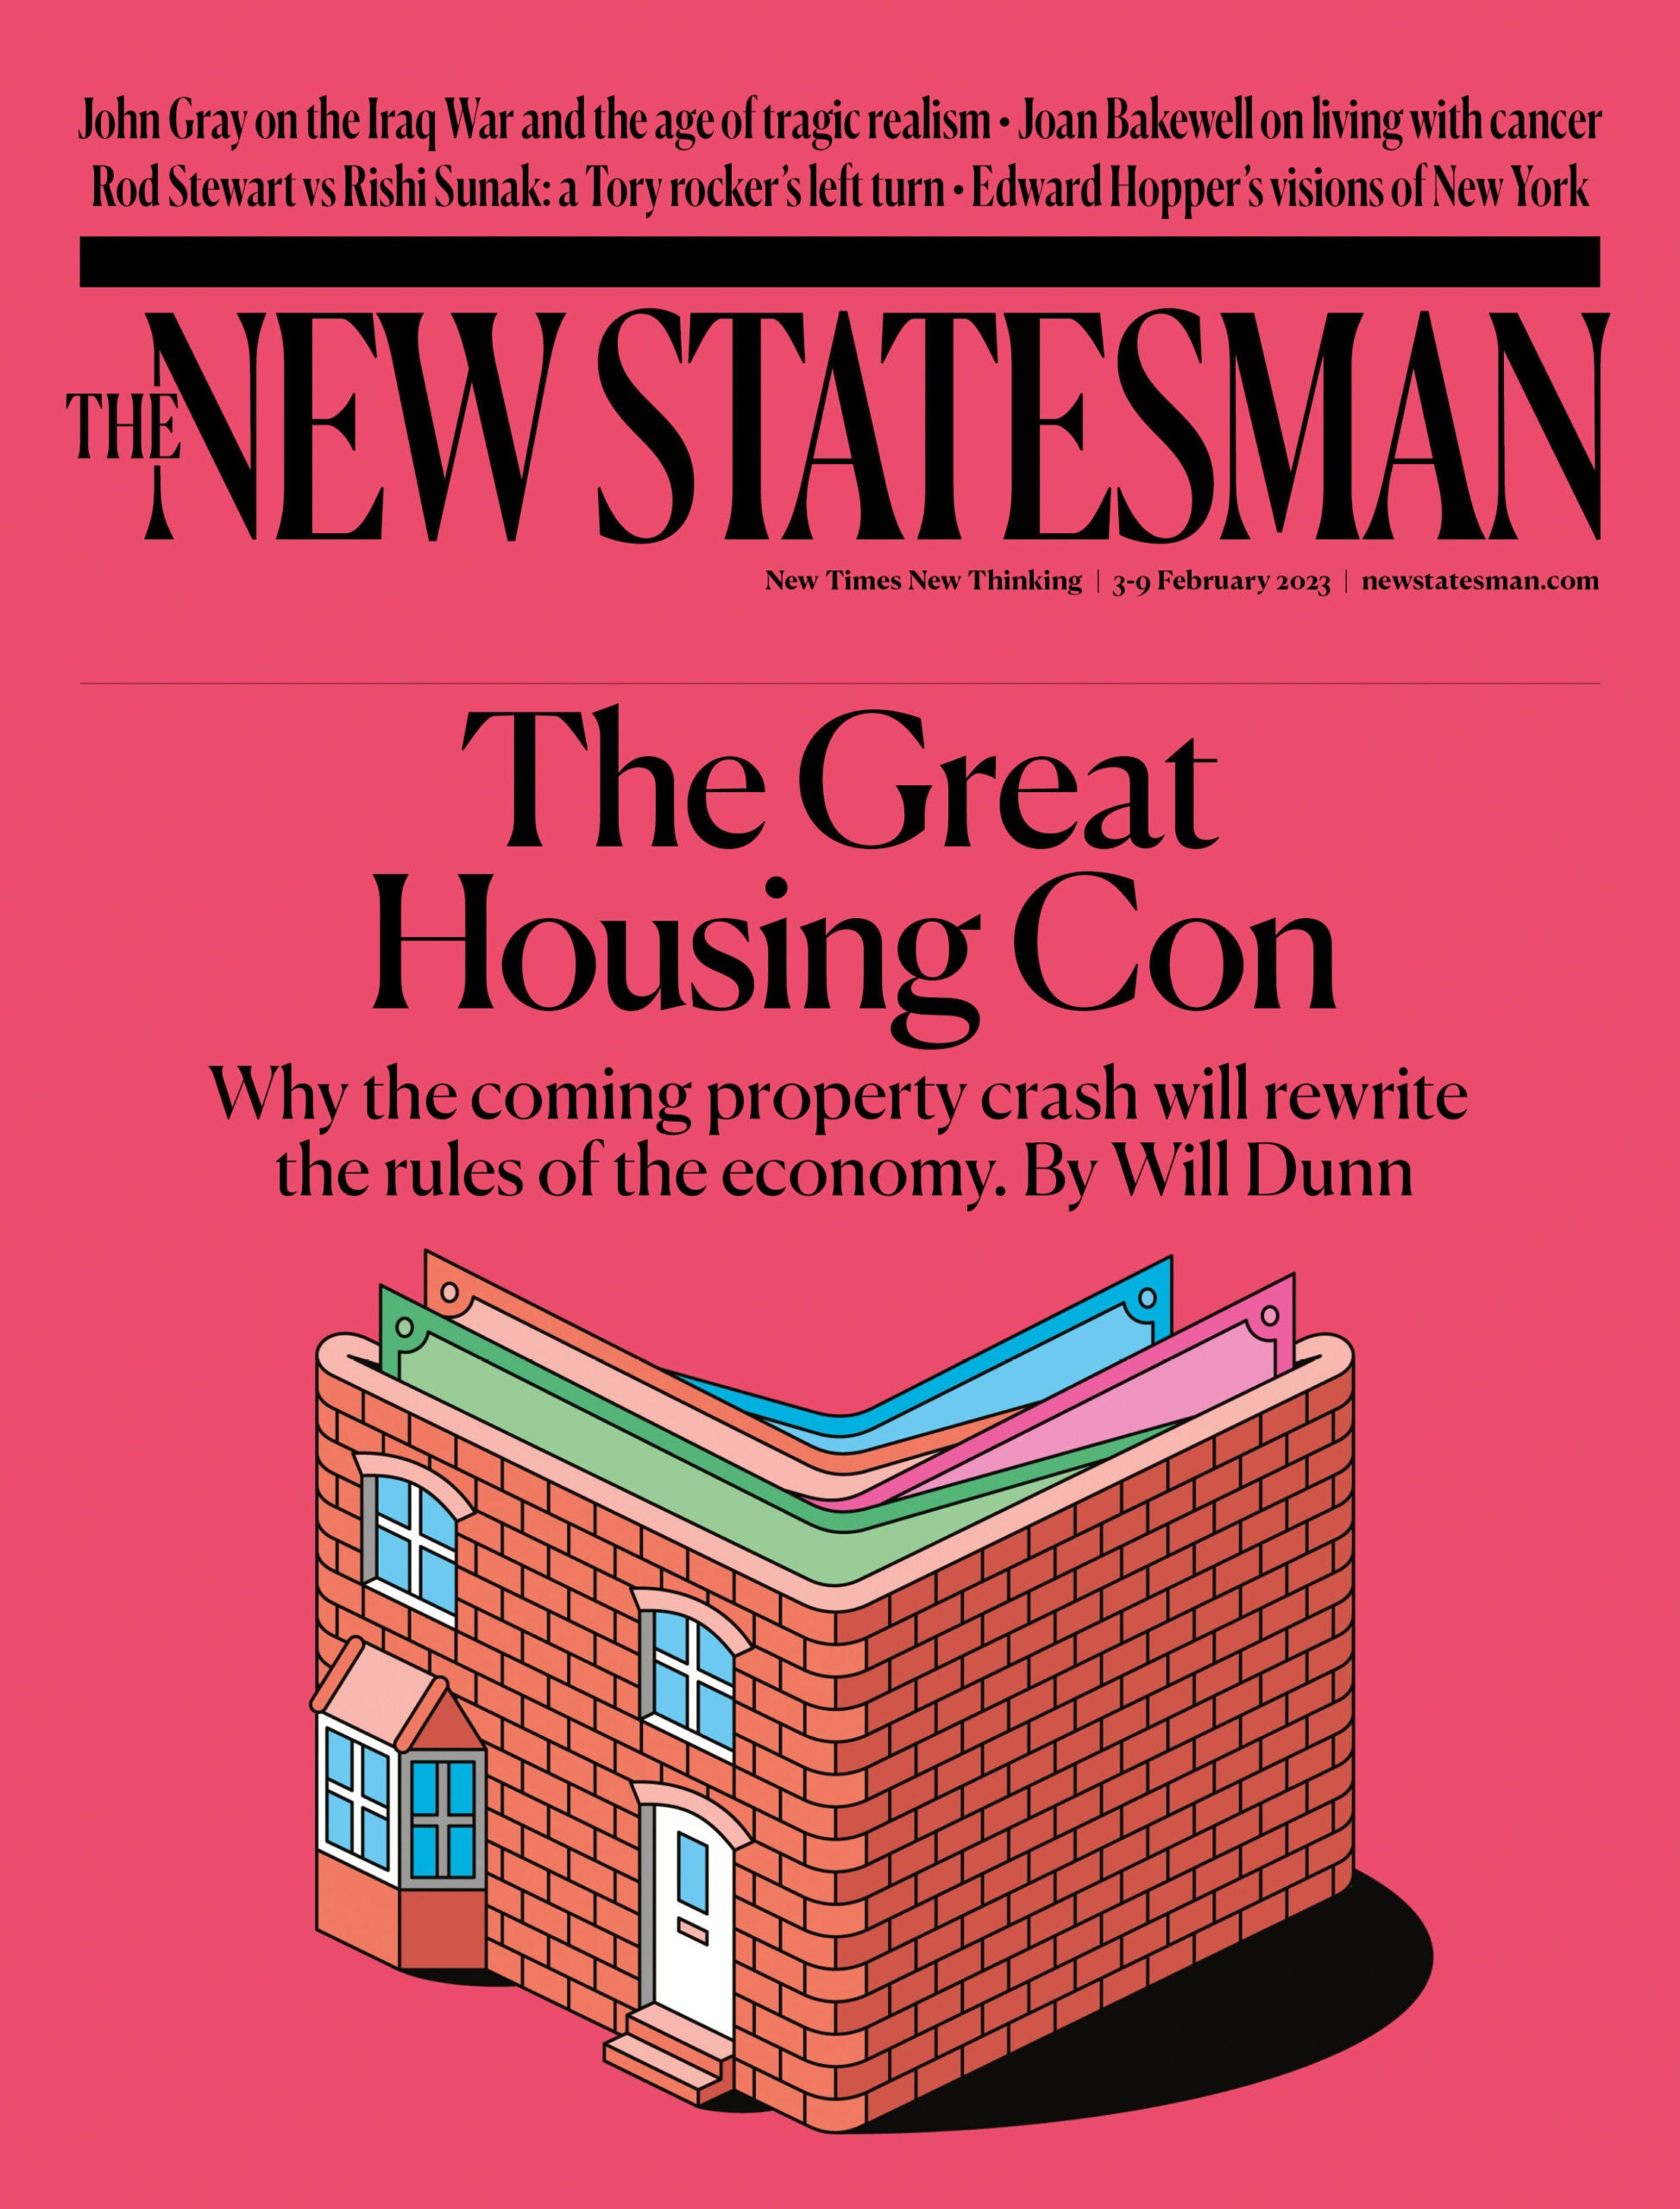 The Great Housing Con